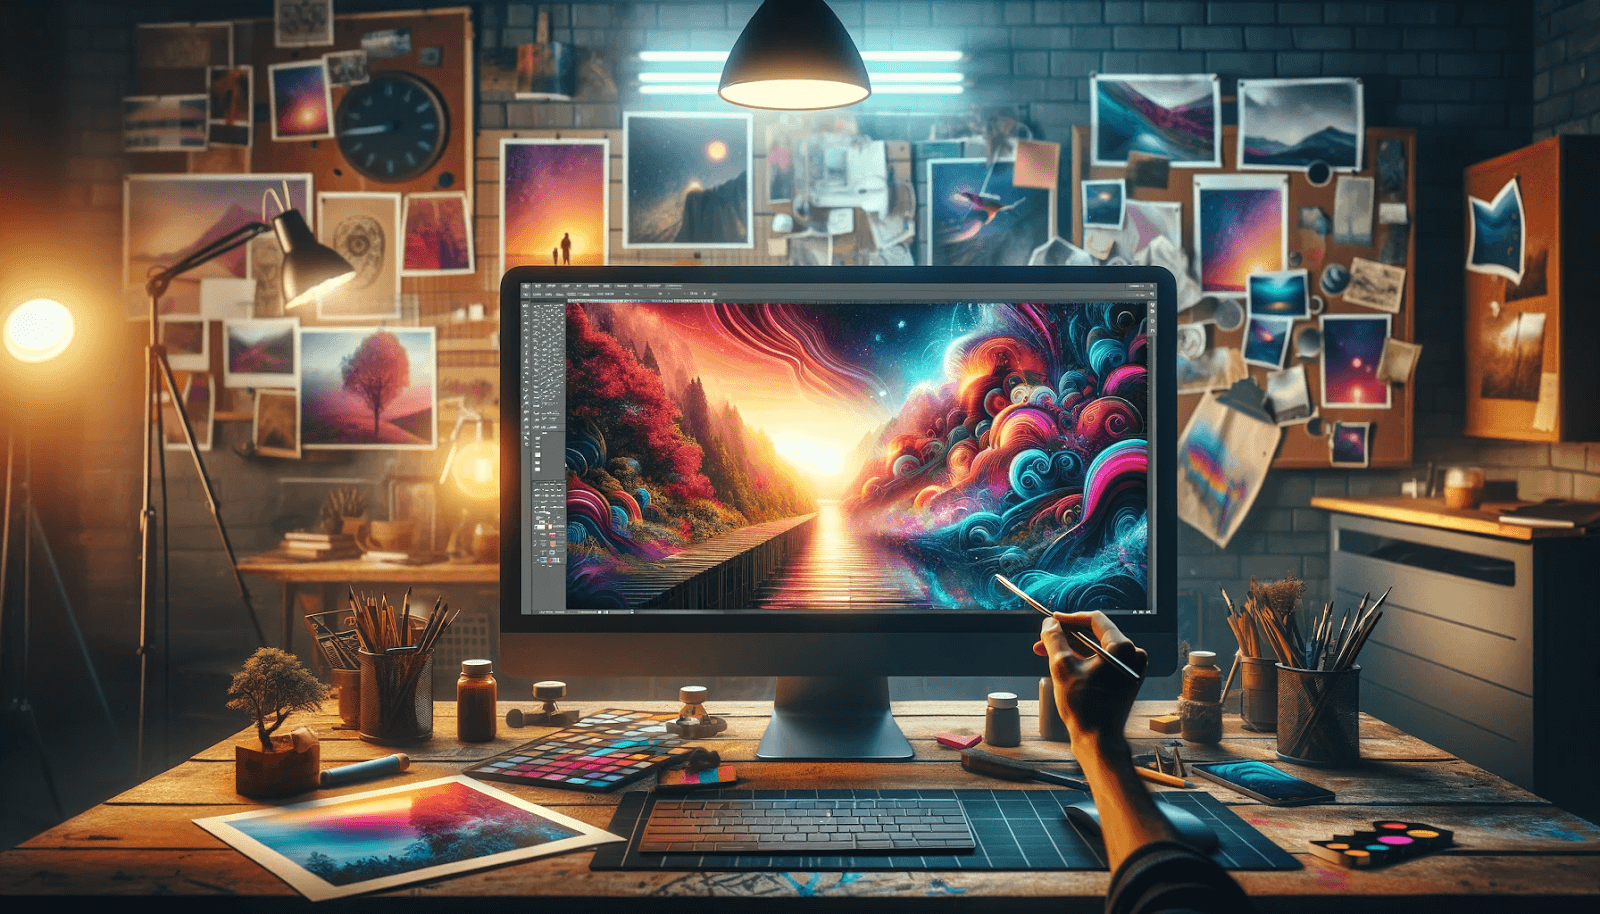 An artist in a studio applying mask tool photoshop skills to a surreal landscape, showcasing the blend of reality and imagination.